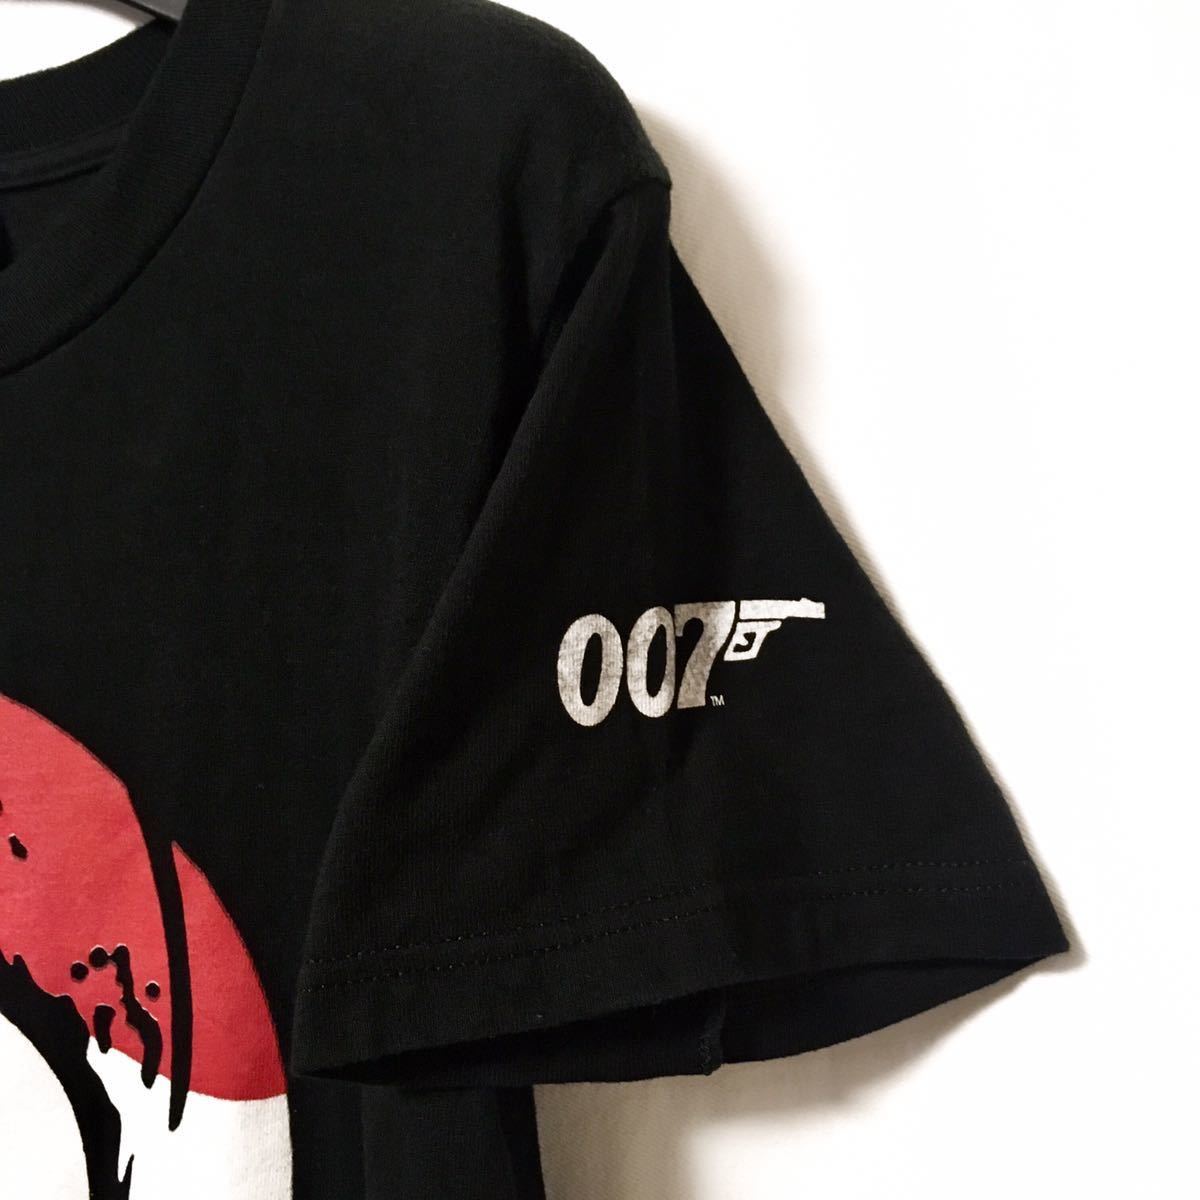 90s 007 tシャツ ムービーtシャツ 企業t